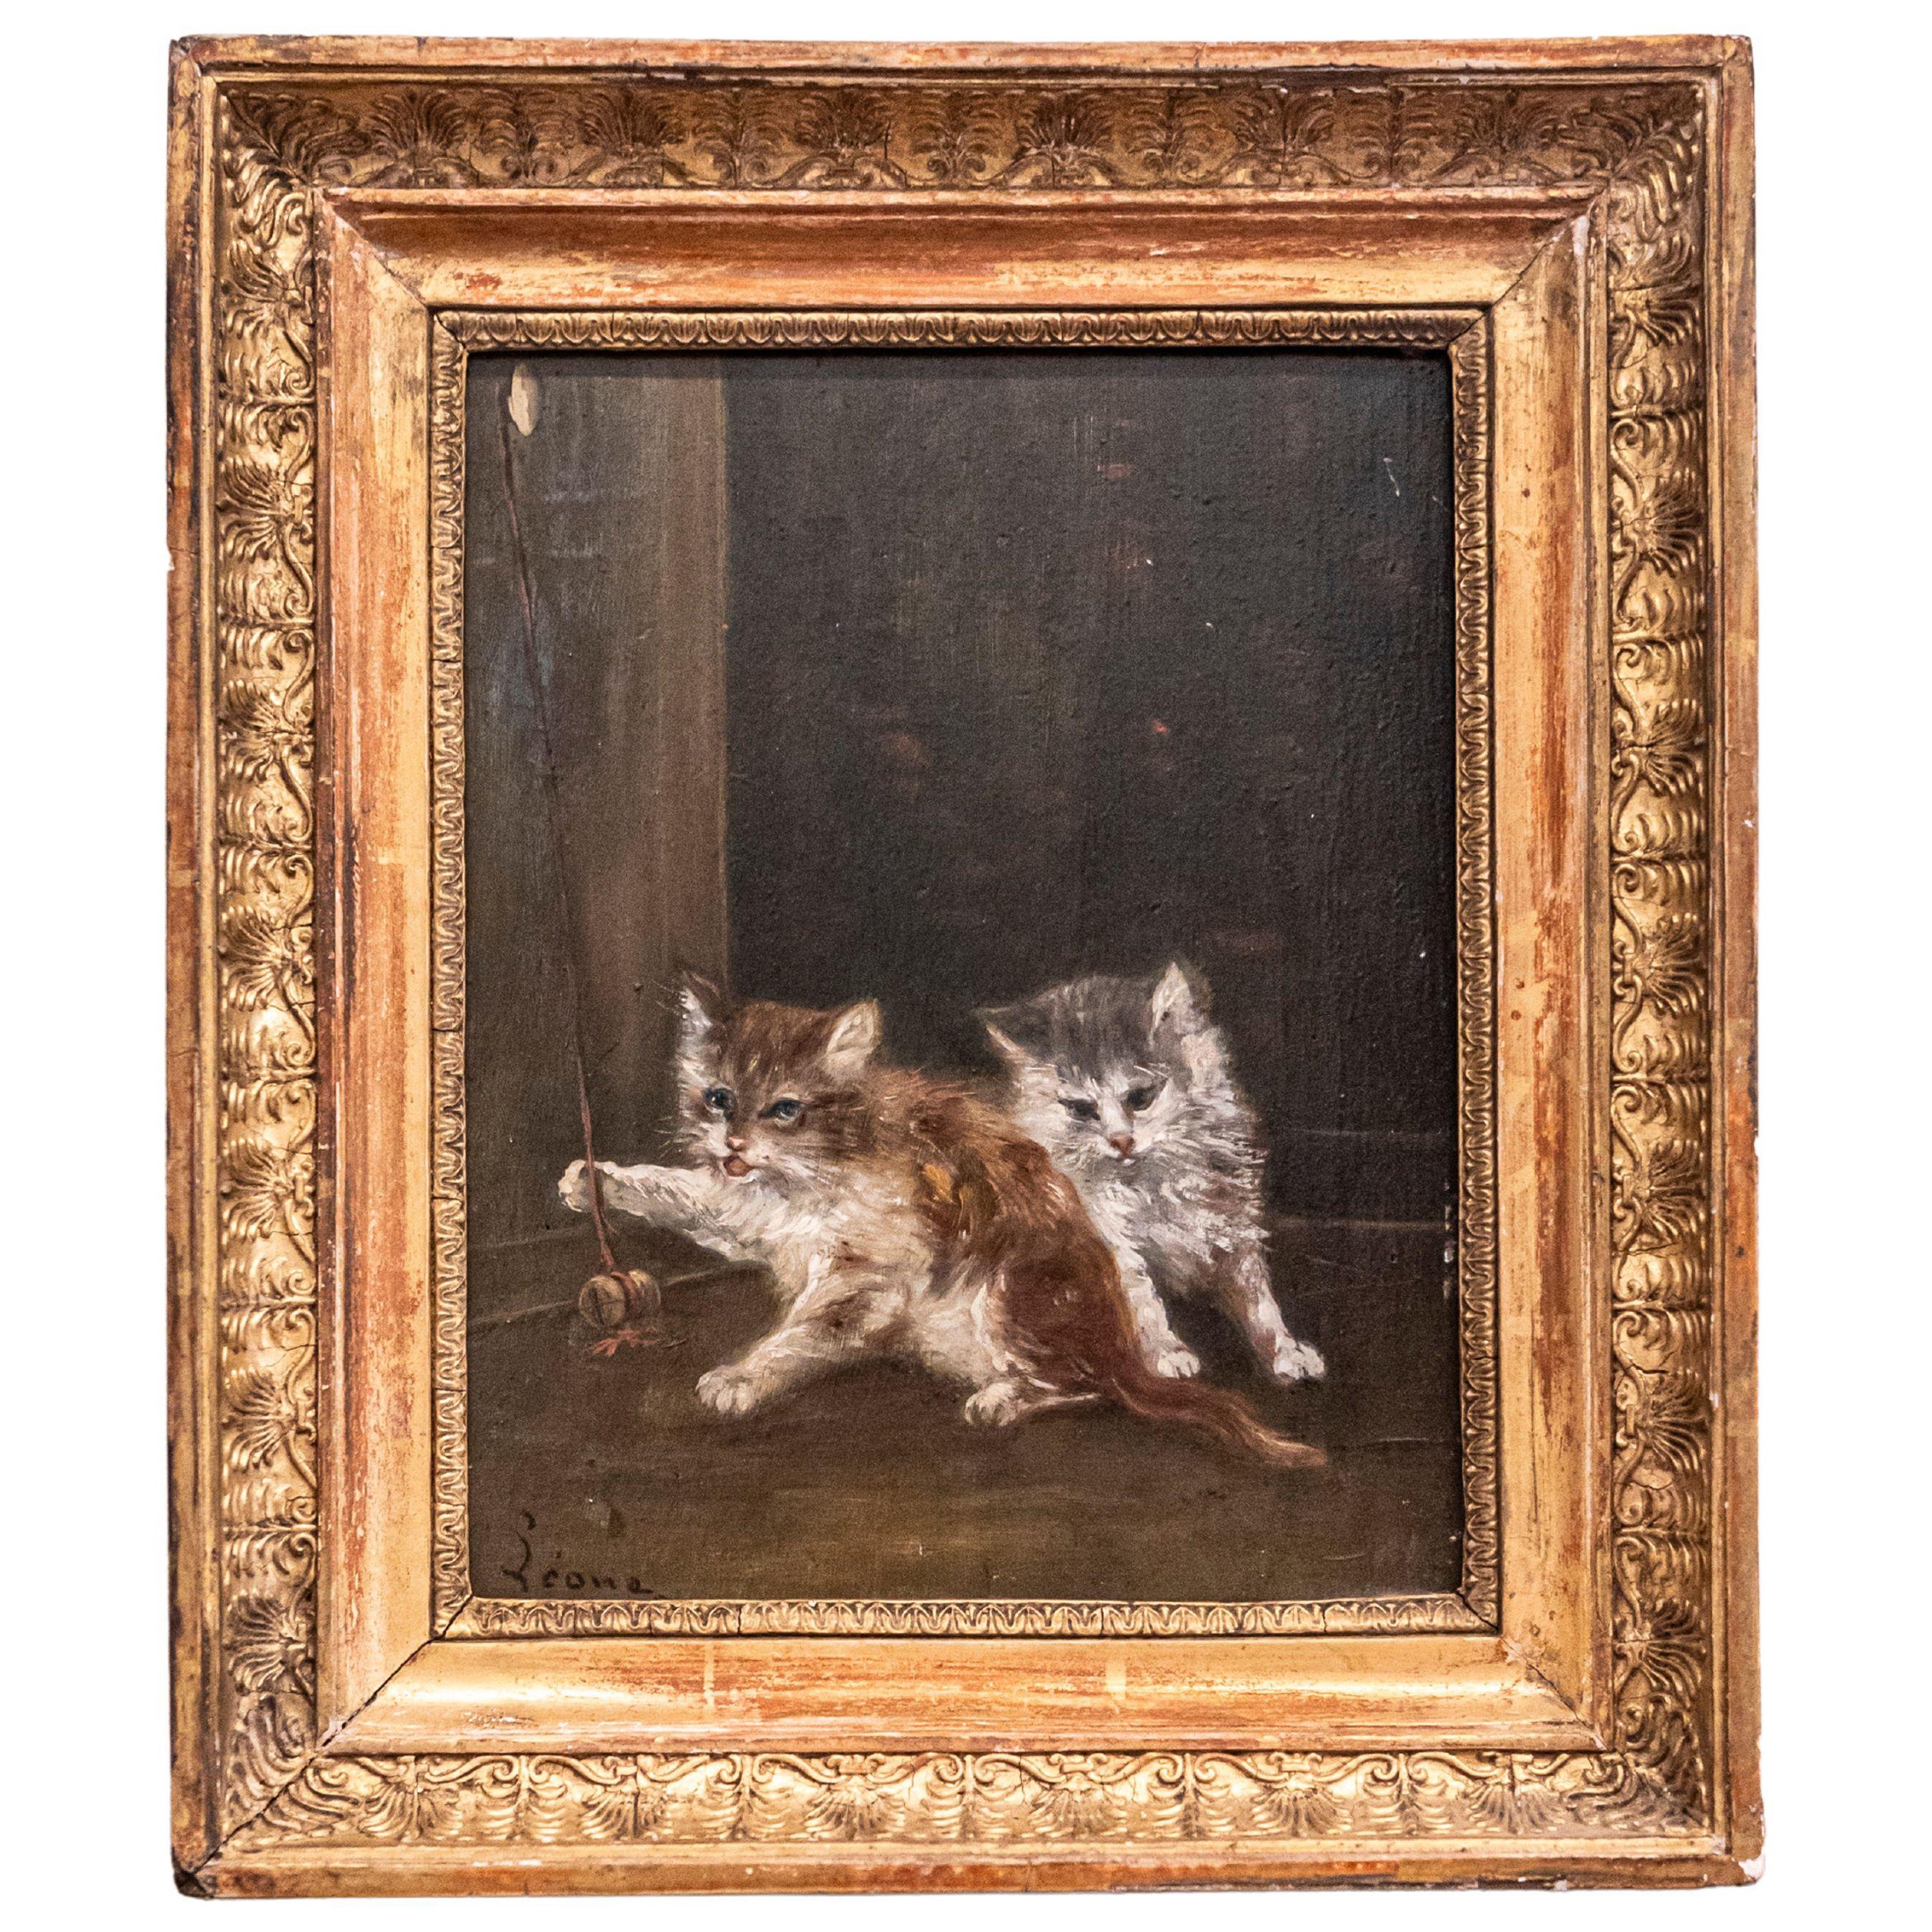 French 1890s Oil on Canvas Painting Featuring Playing Kittens in Giltwood Frame For Sale